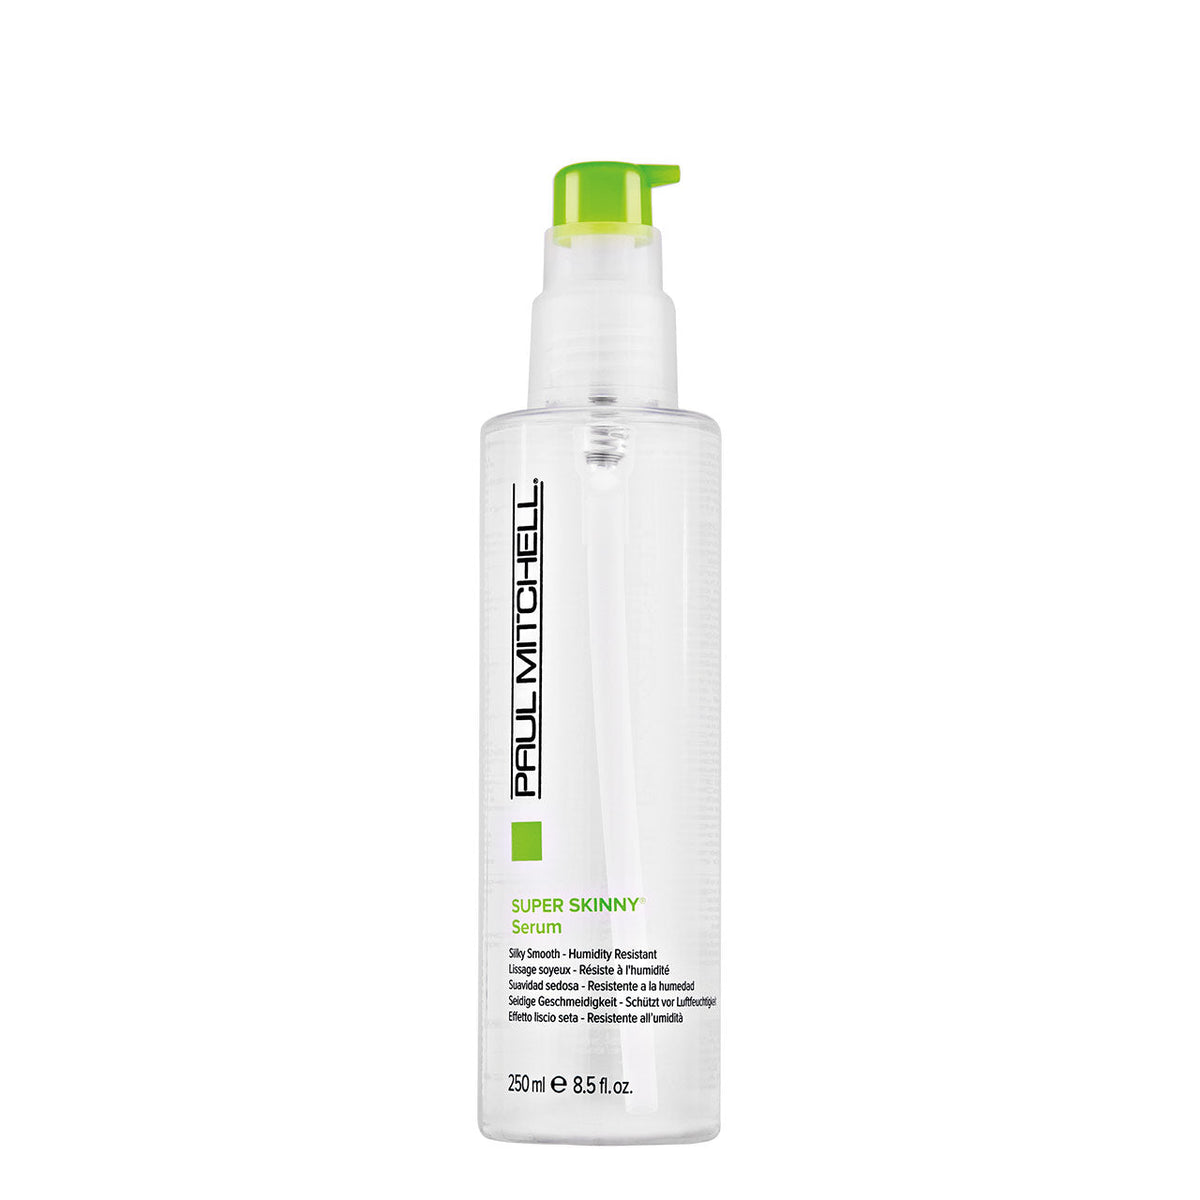 Smoothing Super Skinny Serum - 250ML - by Paul Mitchell |ProCare Outlet|